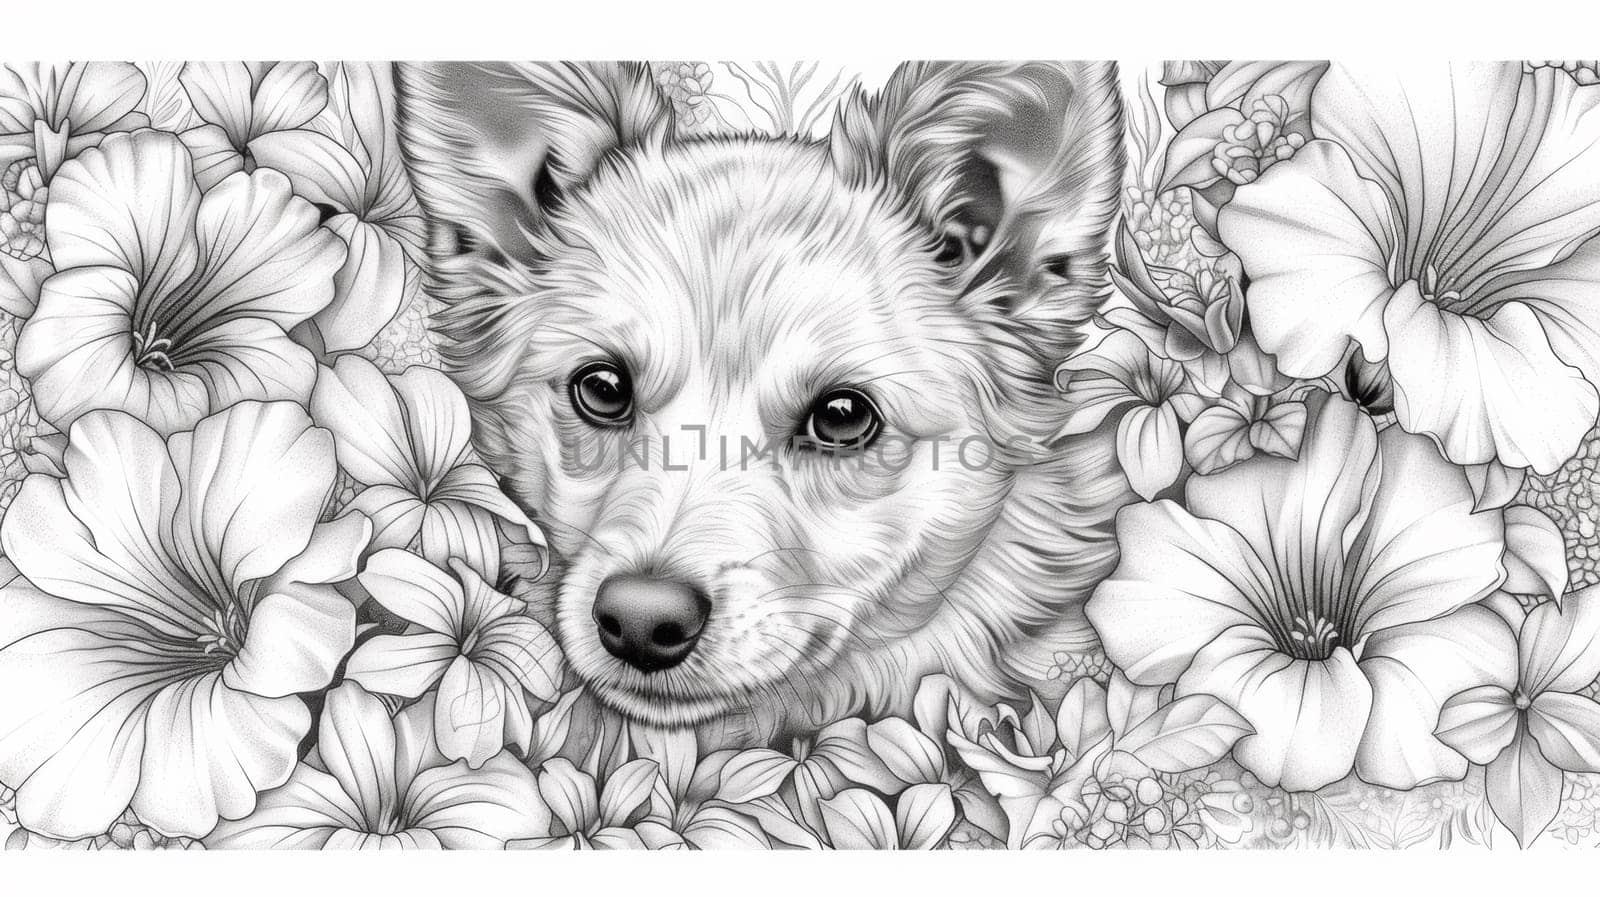 A drawing of a dog surrounded by flowers and leaves, AI by starush